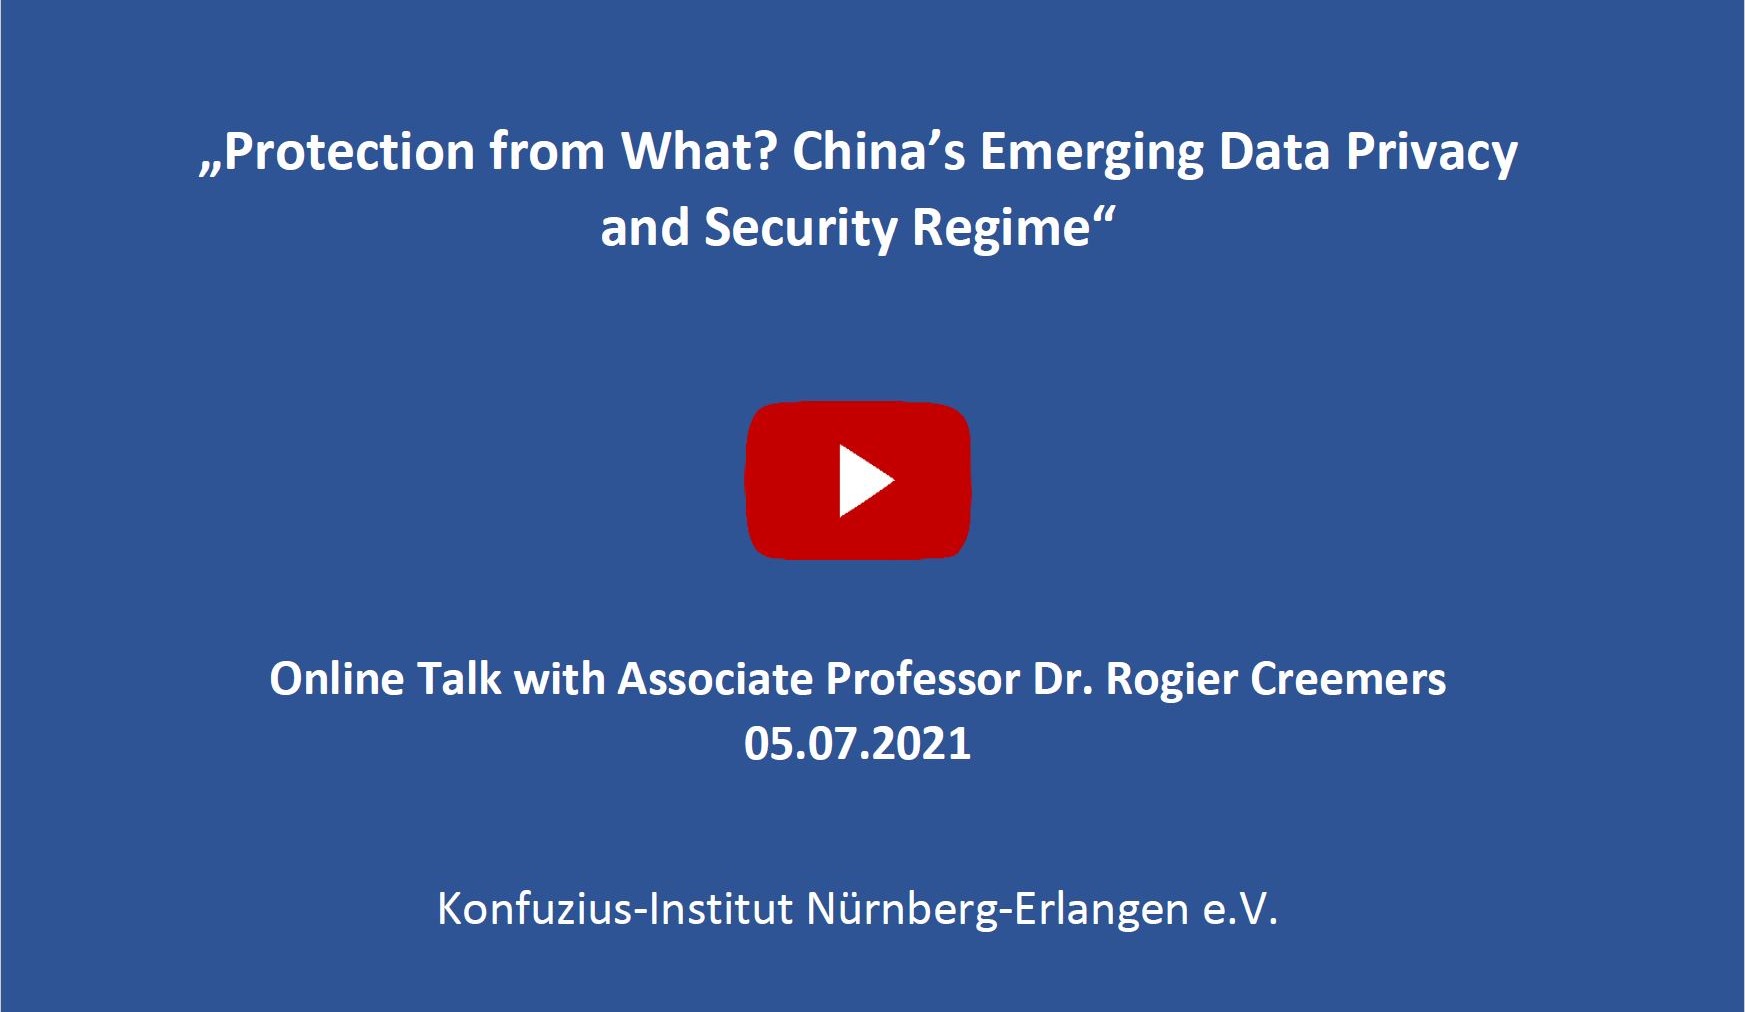 Protection from What? China's Emerging Data Privacy and Security Regime Thumbnail